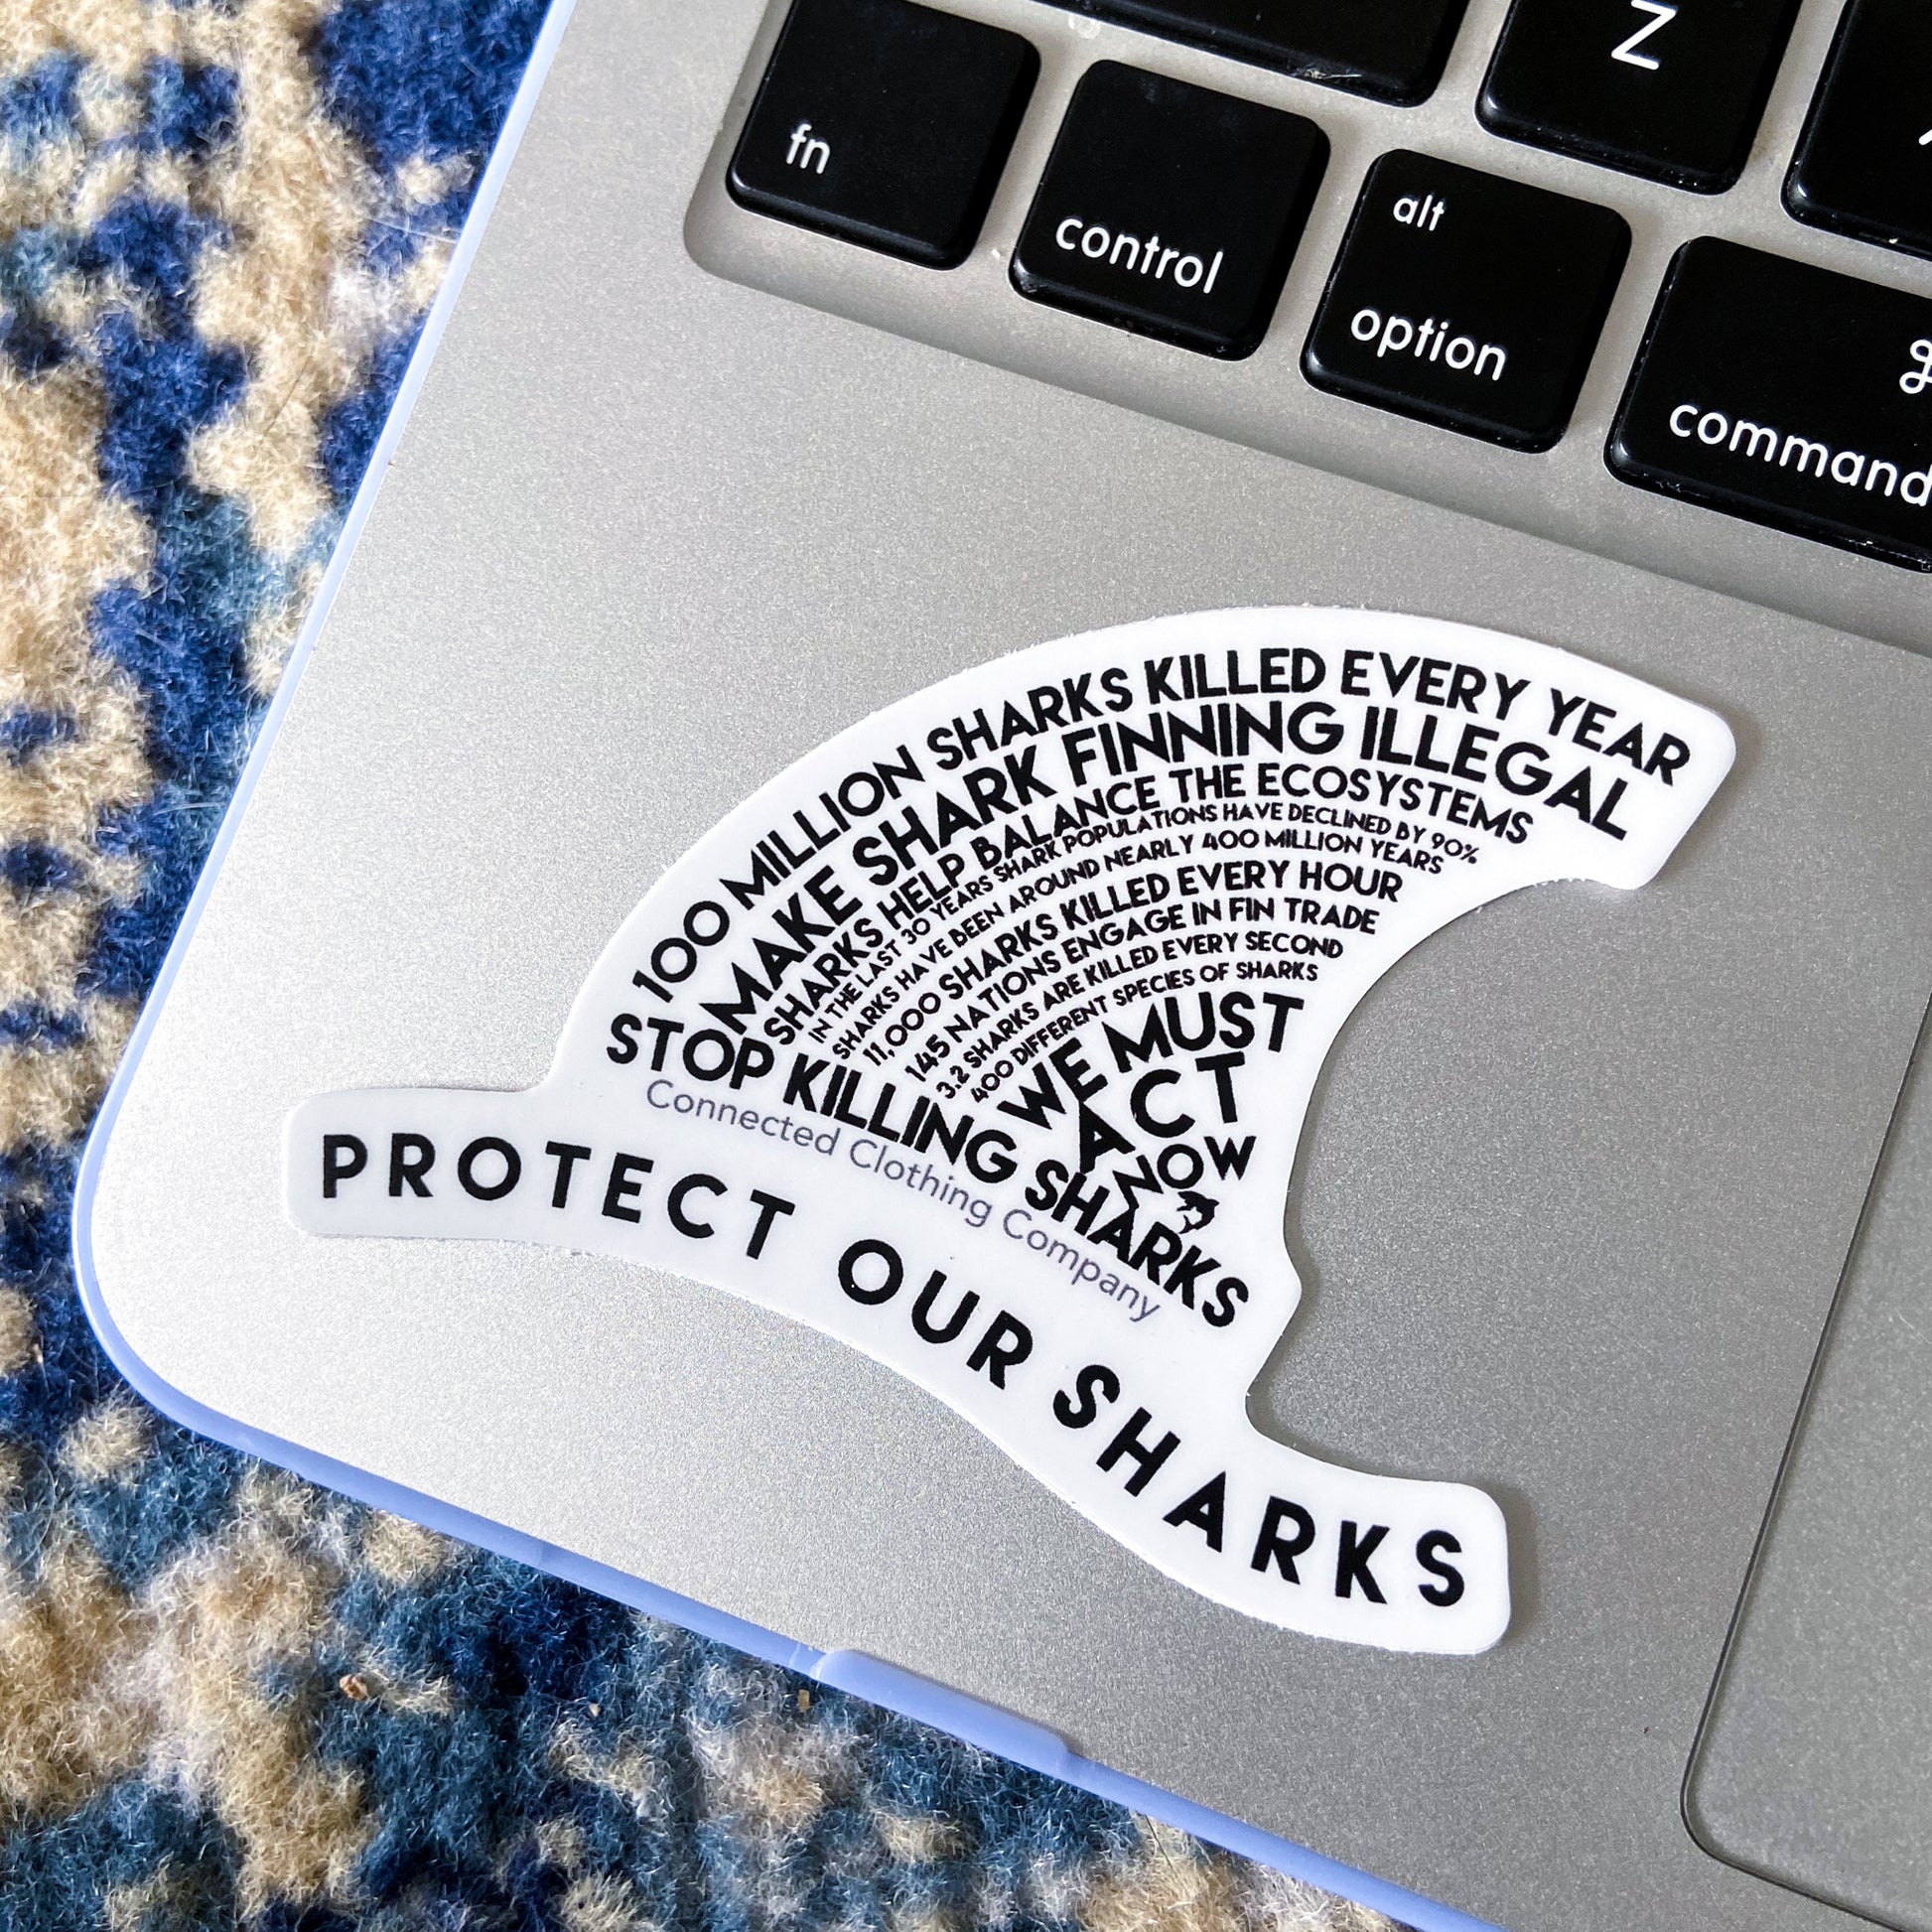 getpinkfit Protect Our Sharks Sticker on Macbook for size reference.